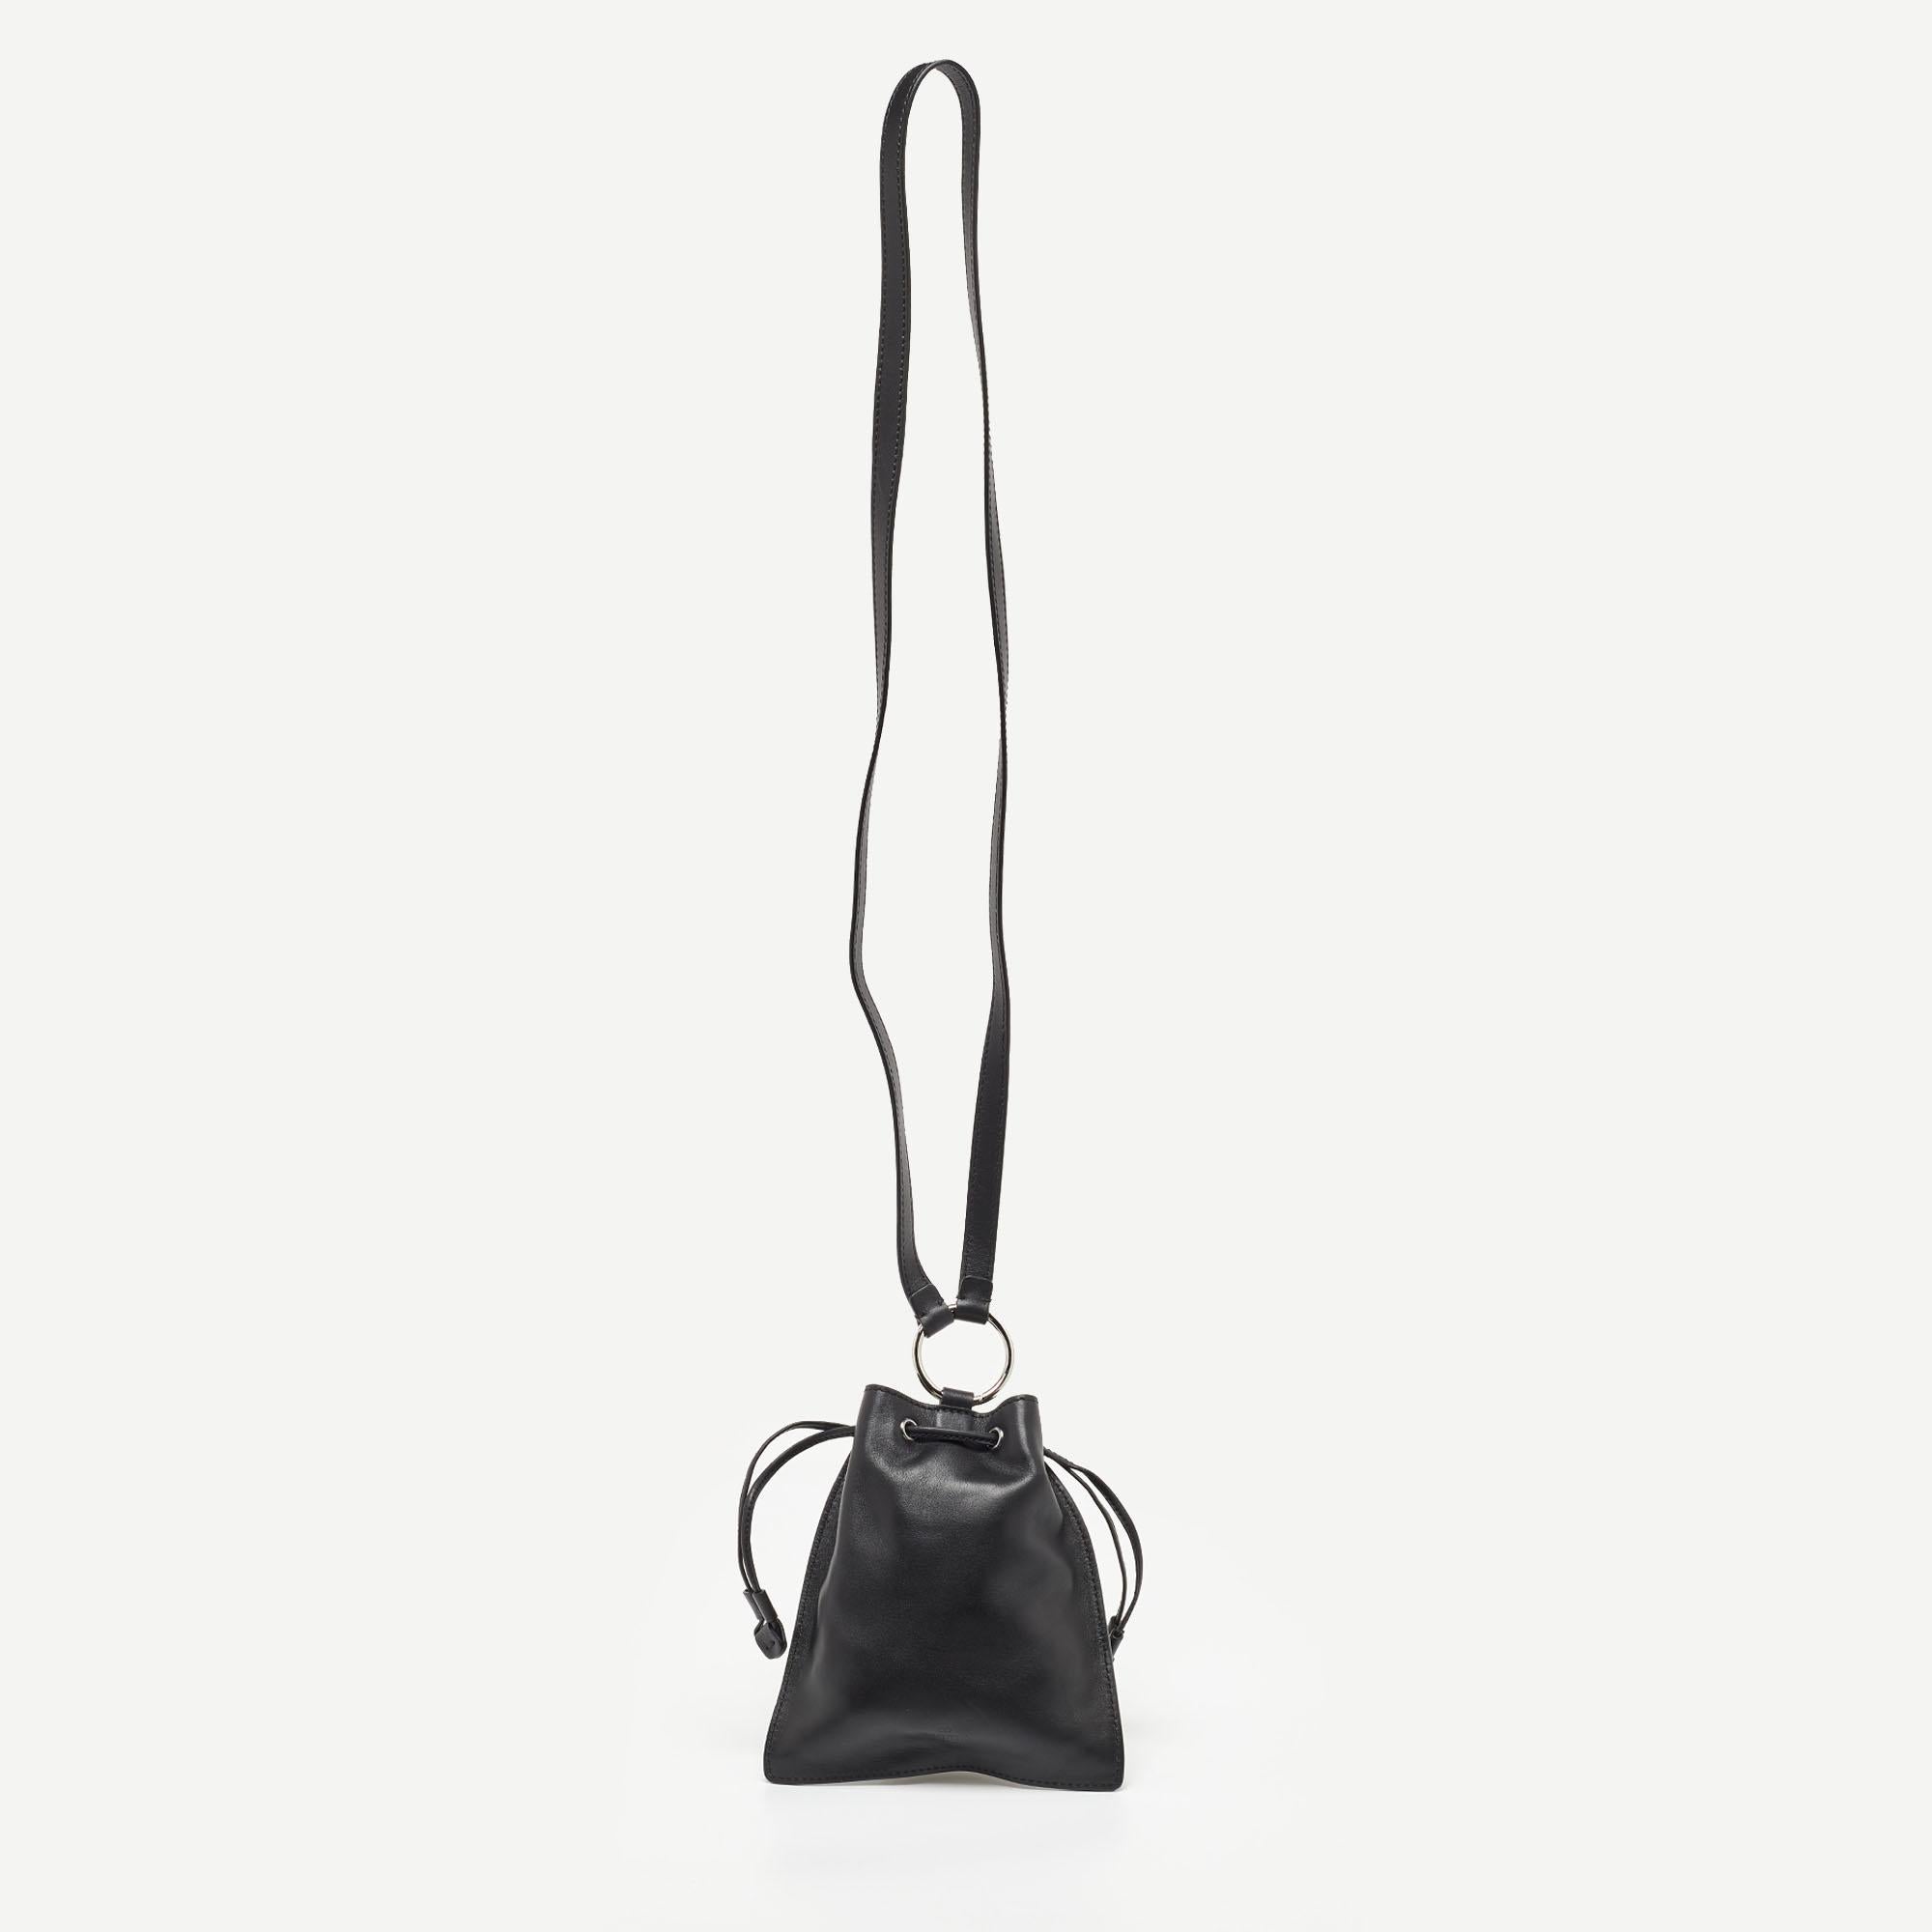 This Valentino pouch is such a stylish fashion-meets-function accessory you'll love carrying it all the time. Crafted from quality materials, it can easily fit your essentials.

